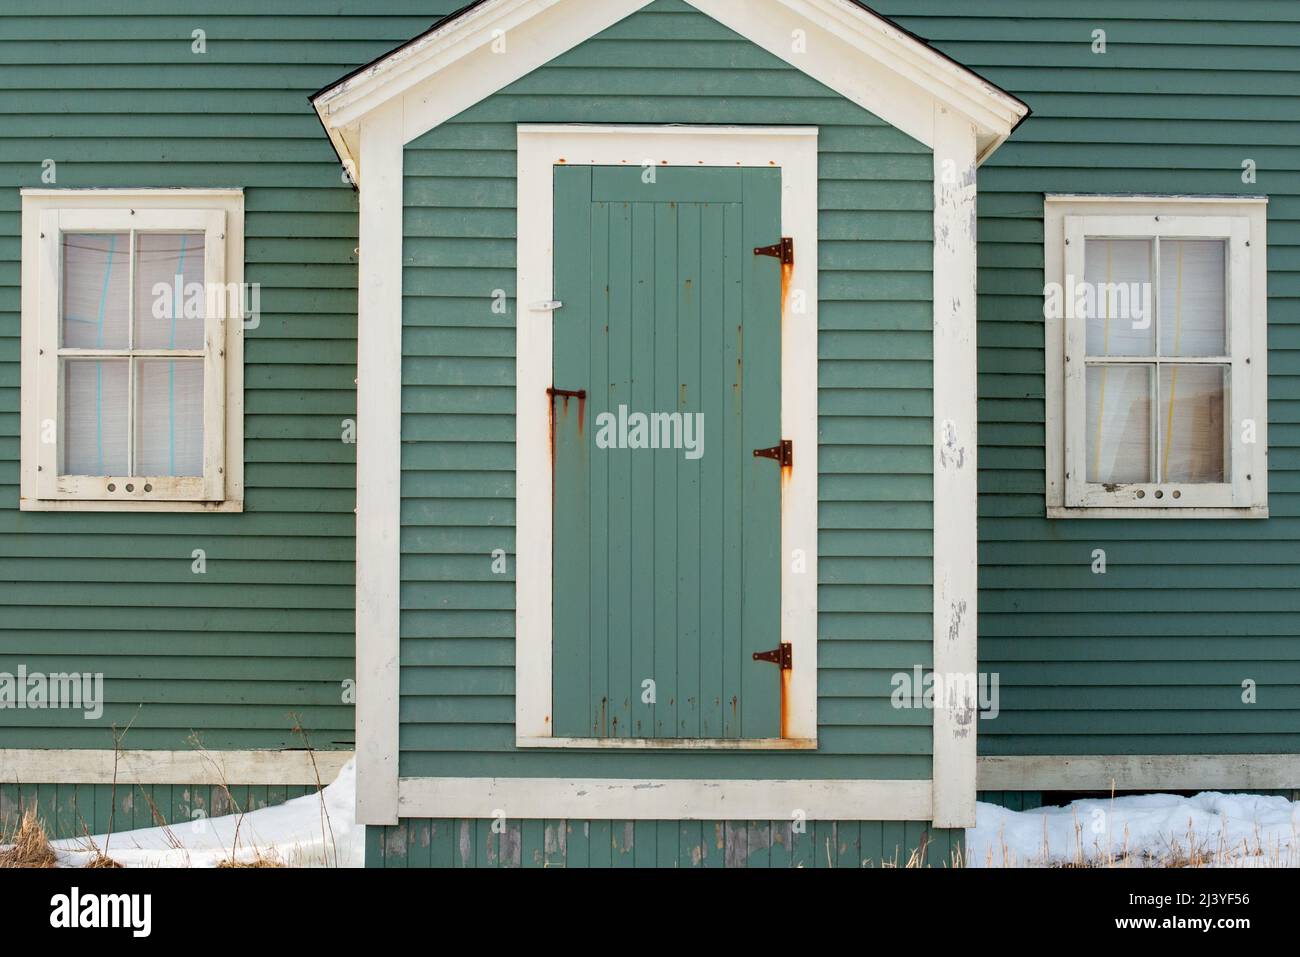 The exterior facade of a vintage wooden building. There's a green single shutter door with rusty hinges, white trim and wood boards on the house.. Stock Photo